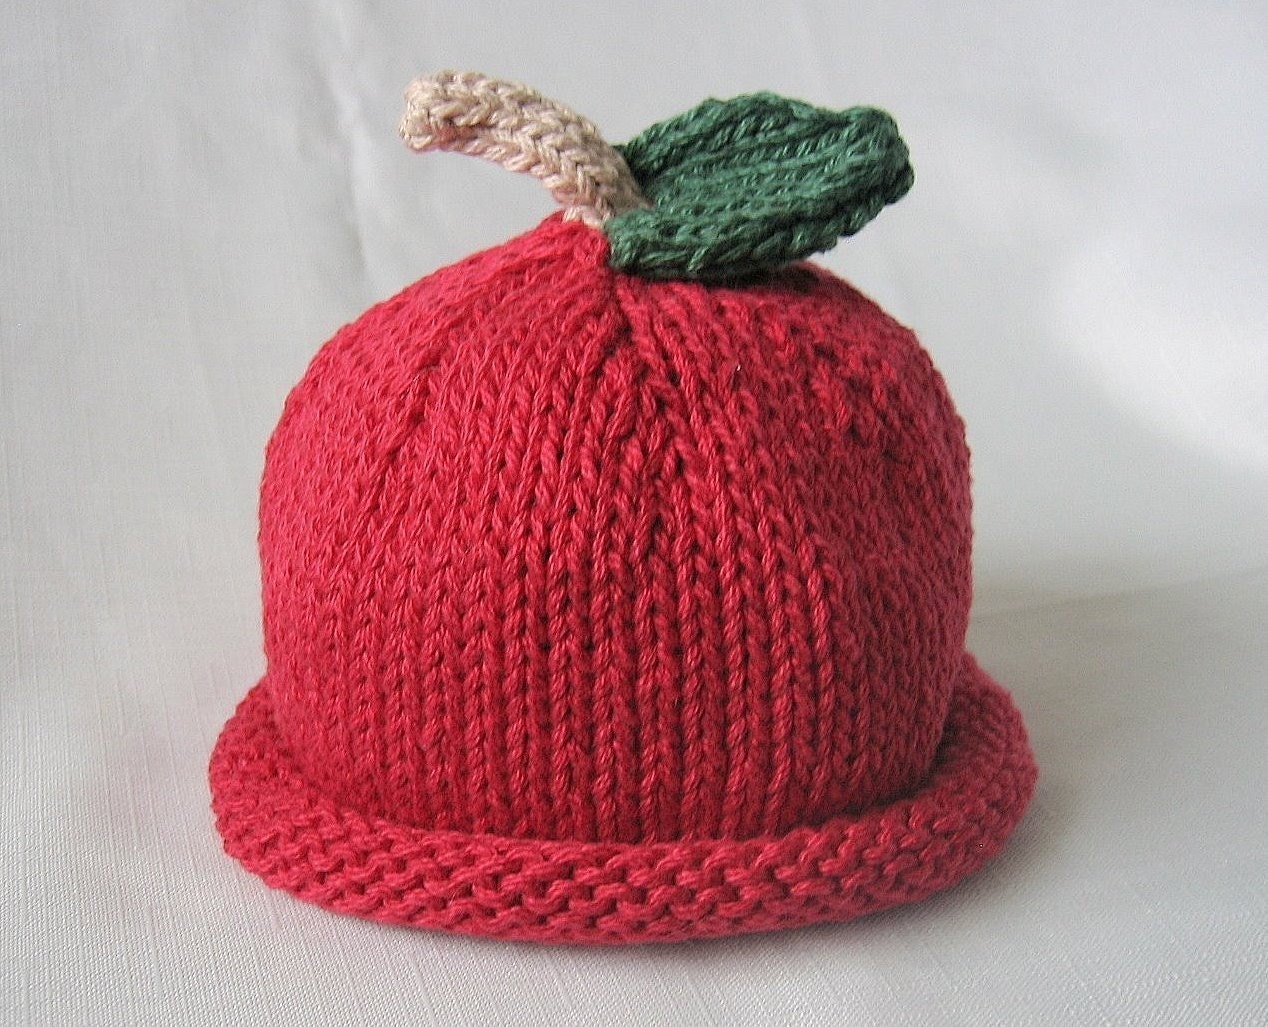 Knit Red Apple Cotton Baby Hat great photo prop | Etsy